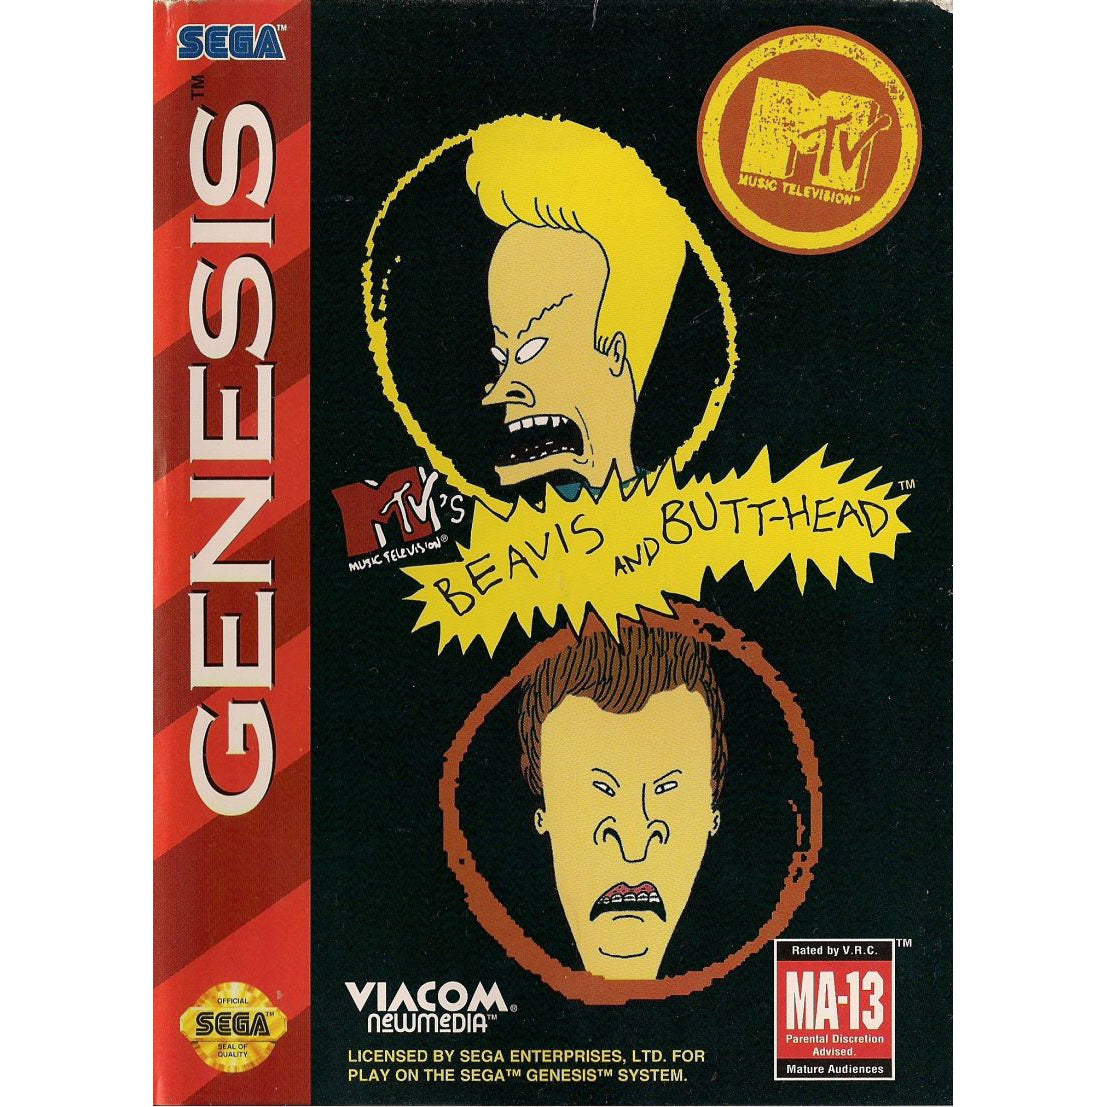 MTV's Beavis and Butt-Head  - Sega Genesis Game - YourGamingShop.com - Buy, Sell, Trade Video Games Online. 120 Day Warranty. Satisfaction Guaranteed.